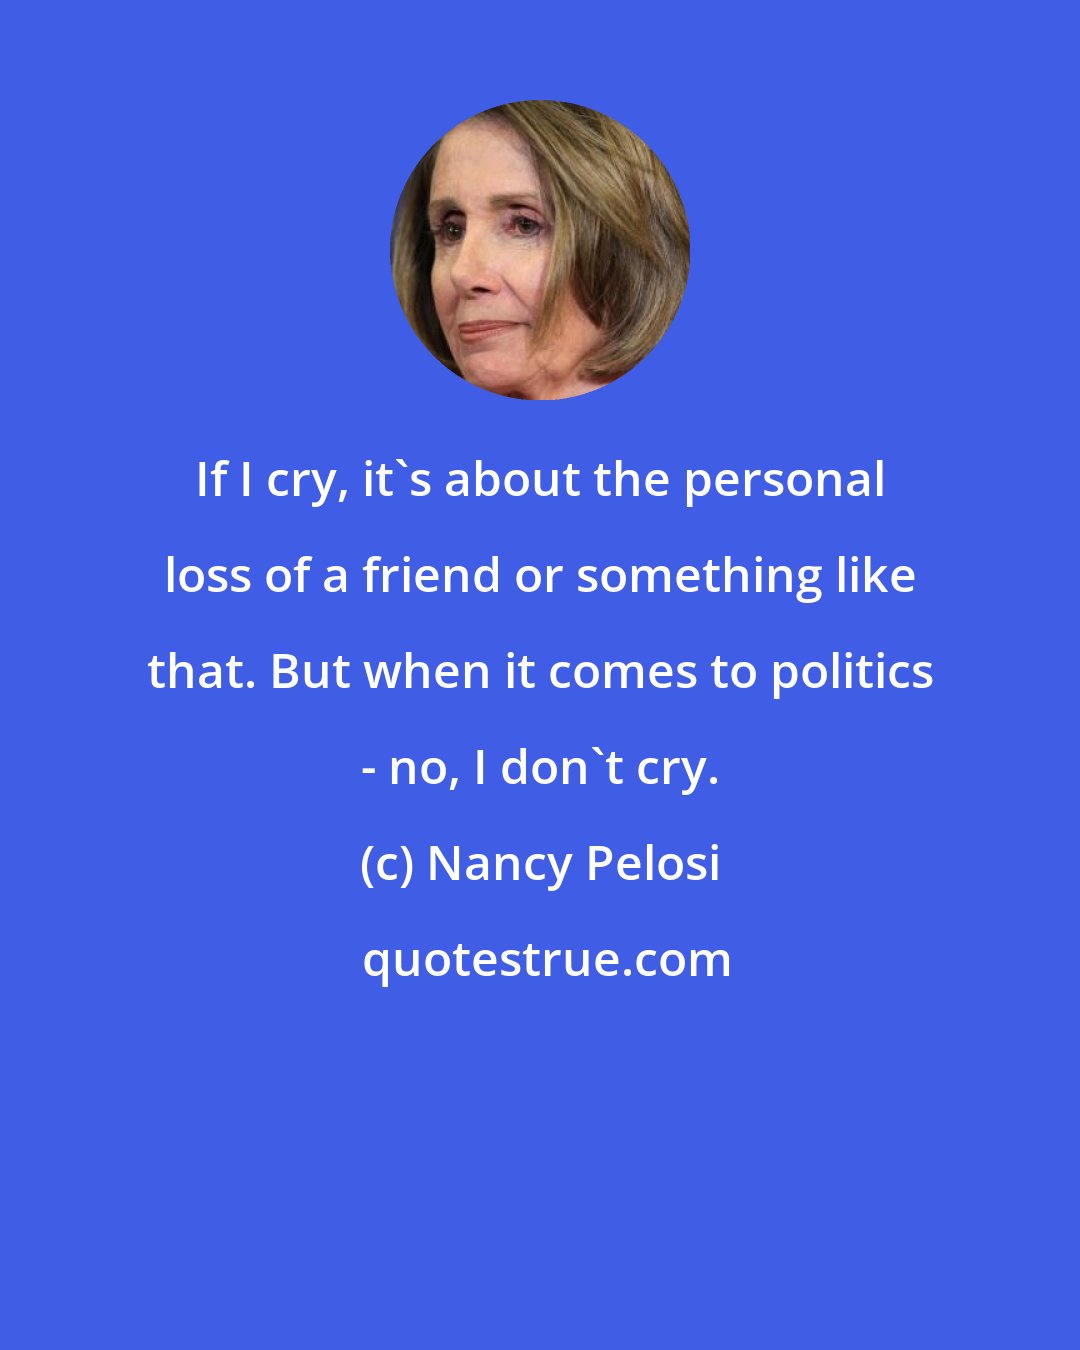 Nancy Pelosi: If I cry, it's about the personal loss of a friend or something like that. But when it comes to politics - no, I don't cry.